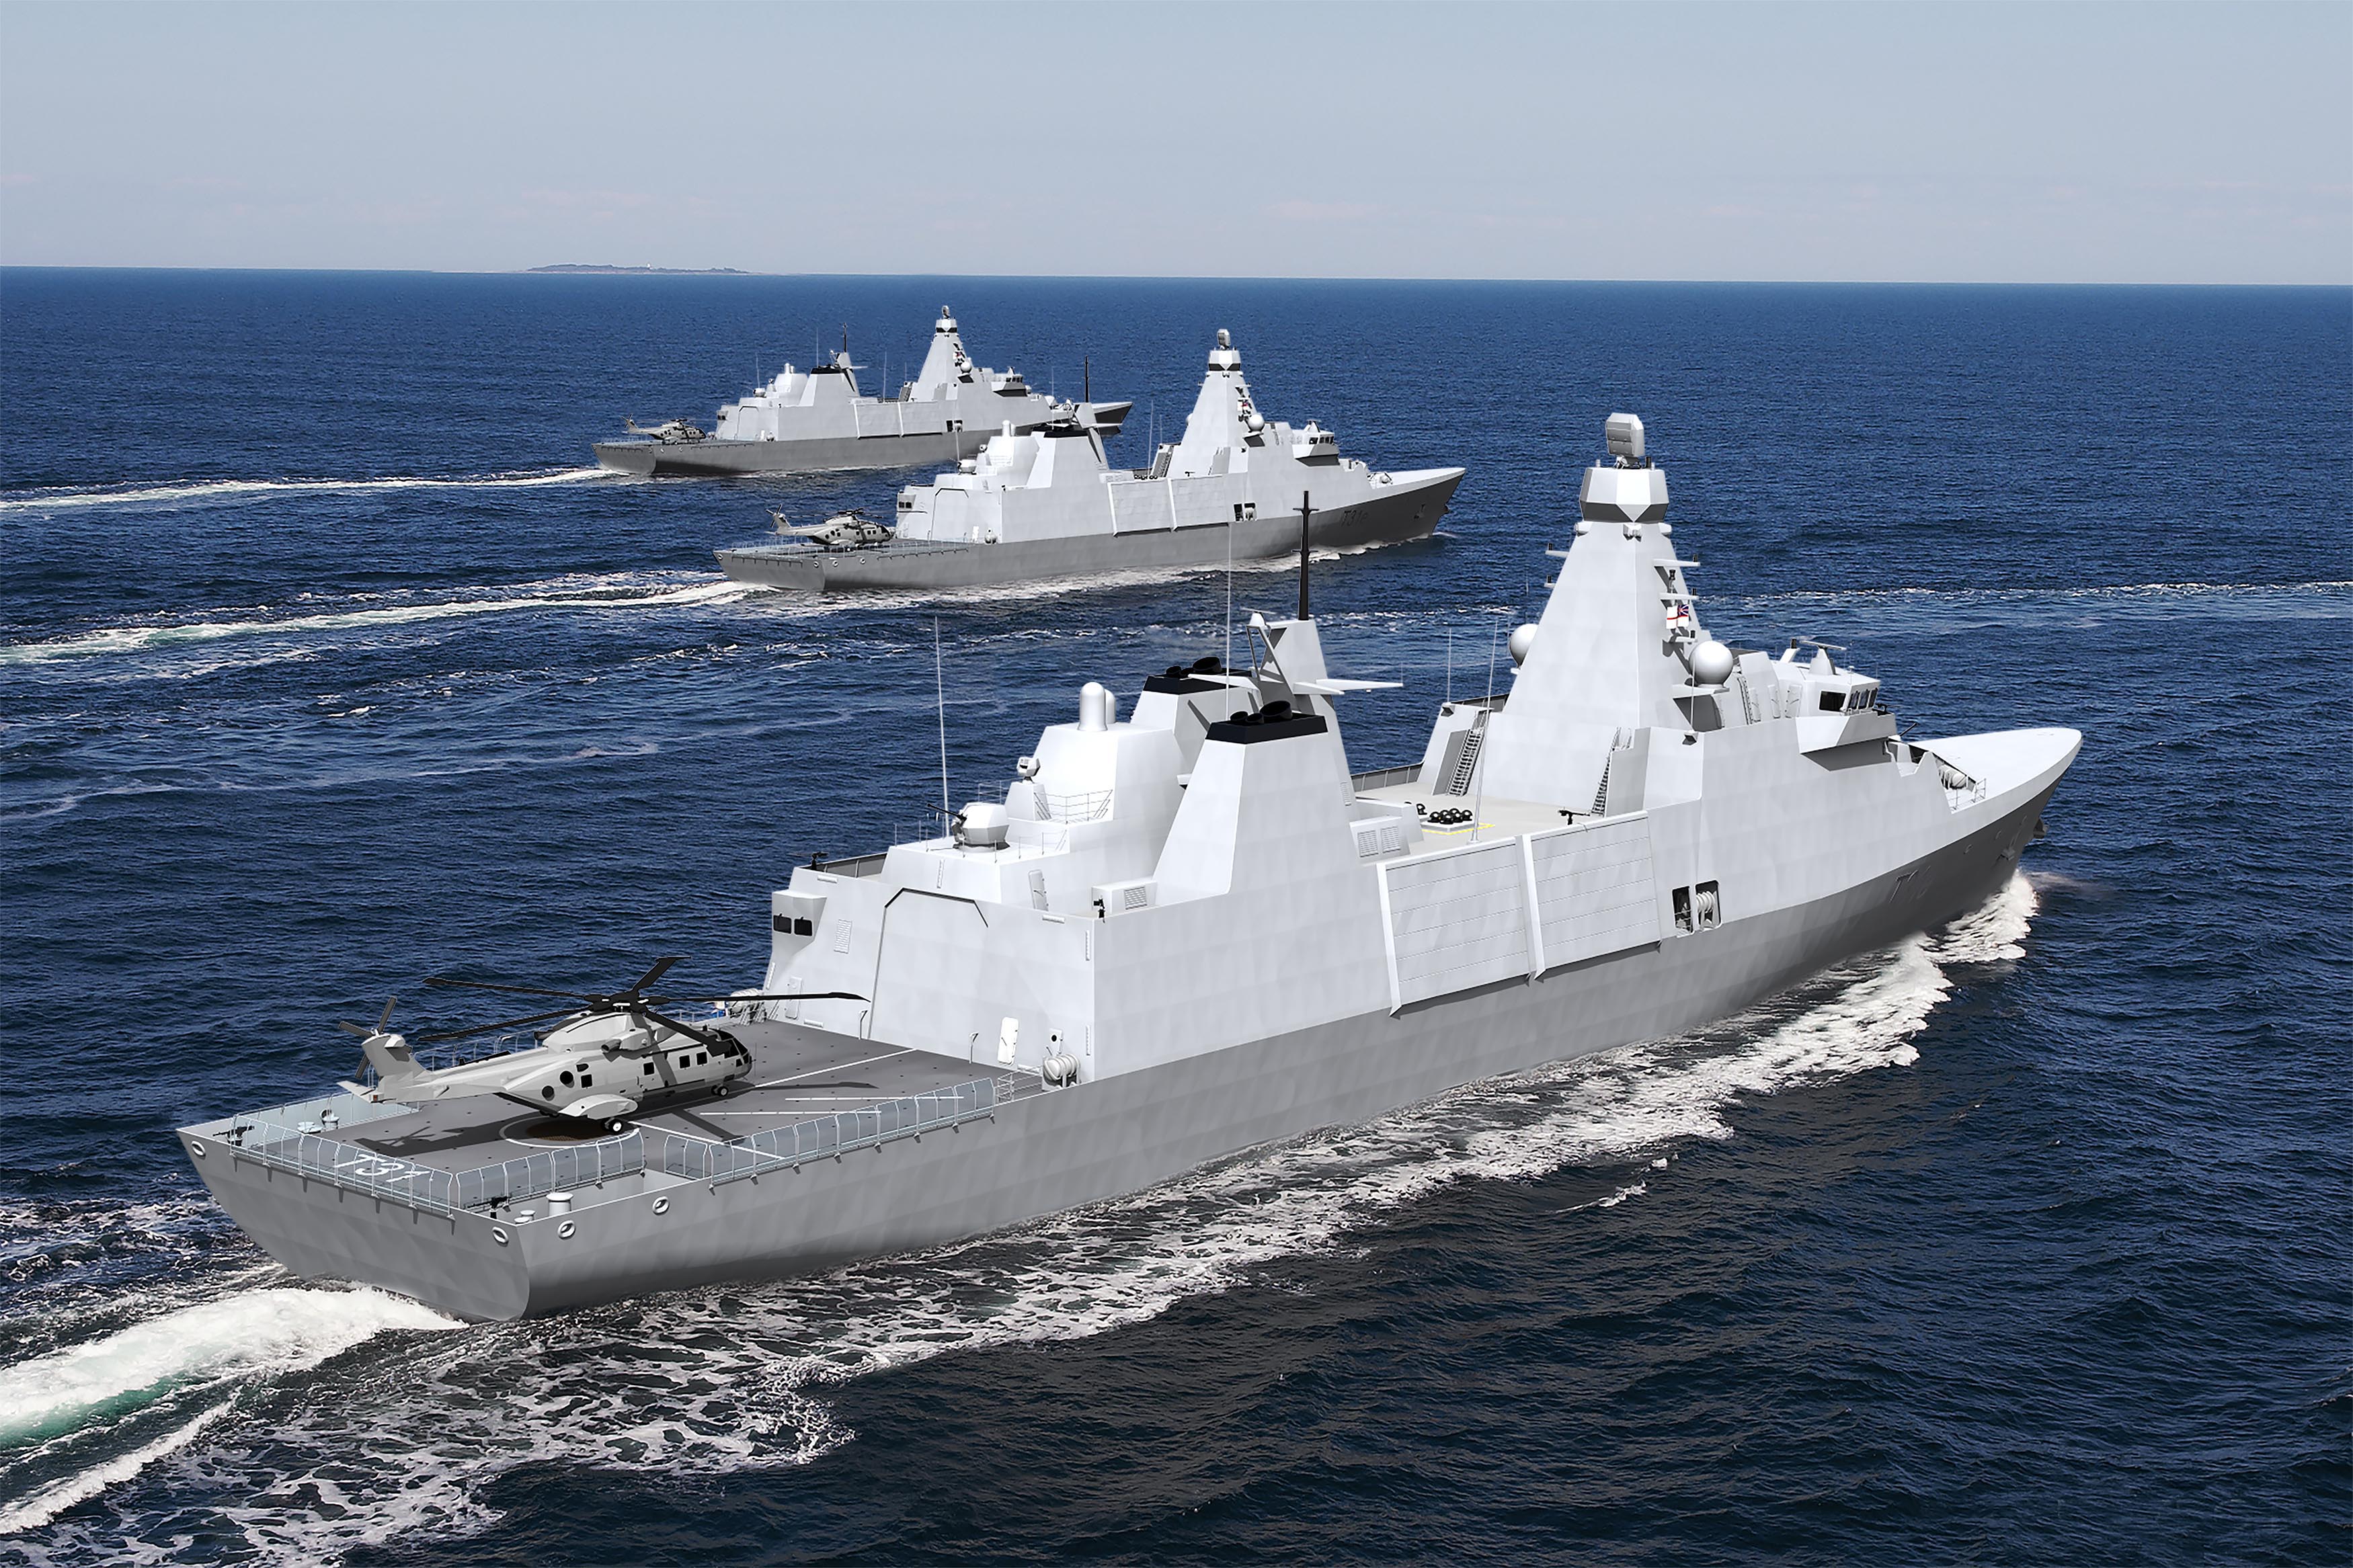 Britain’s next generation of frigates named